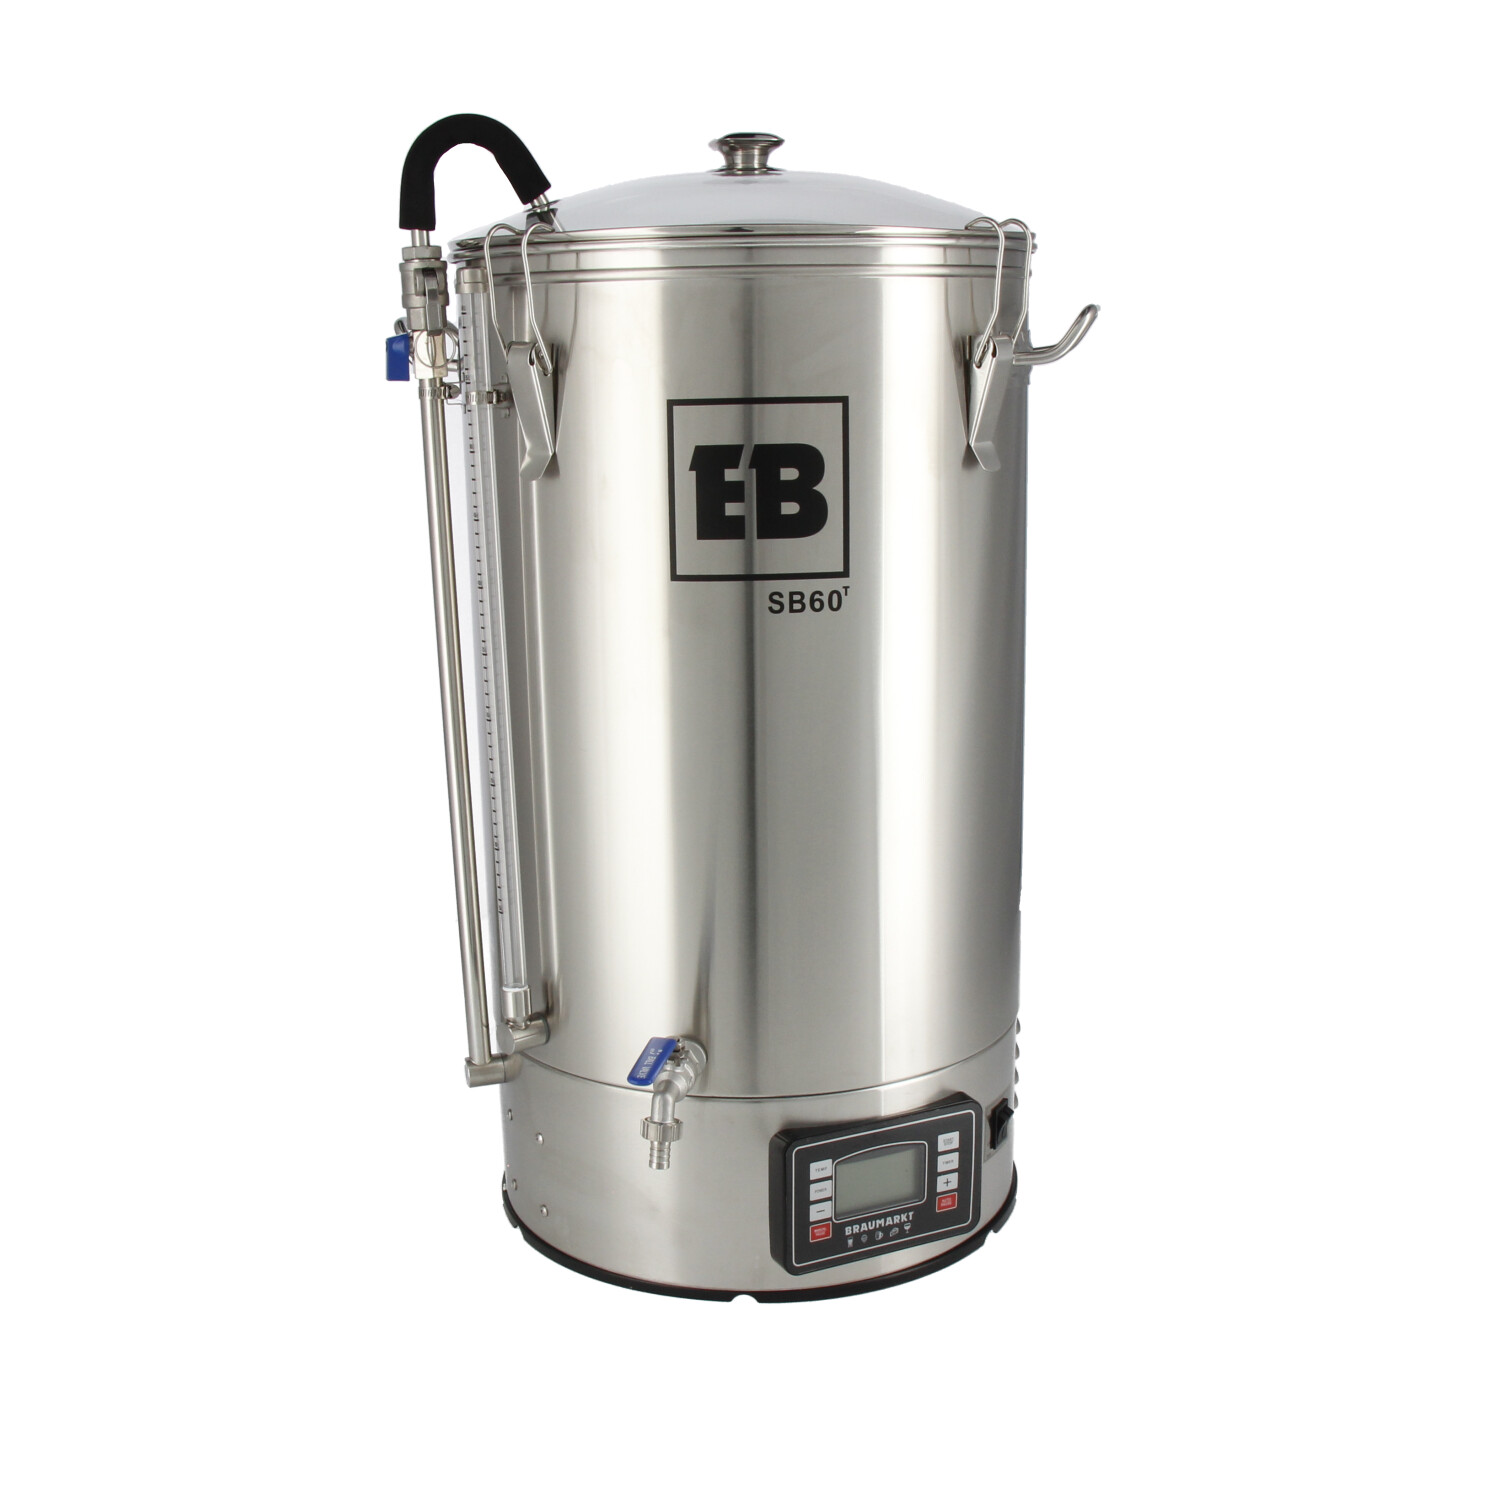 Easybrew SB60T All-in-One Brouwketel